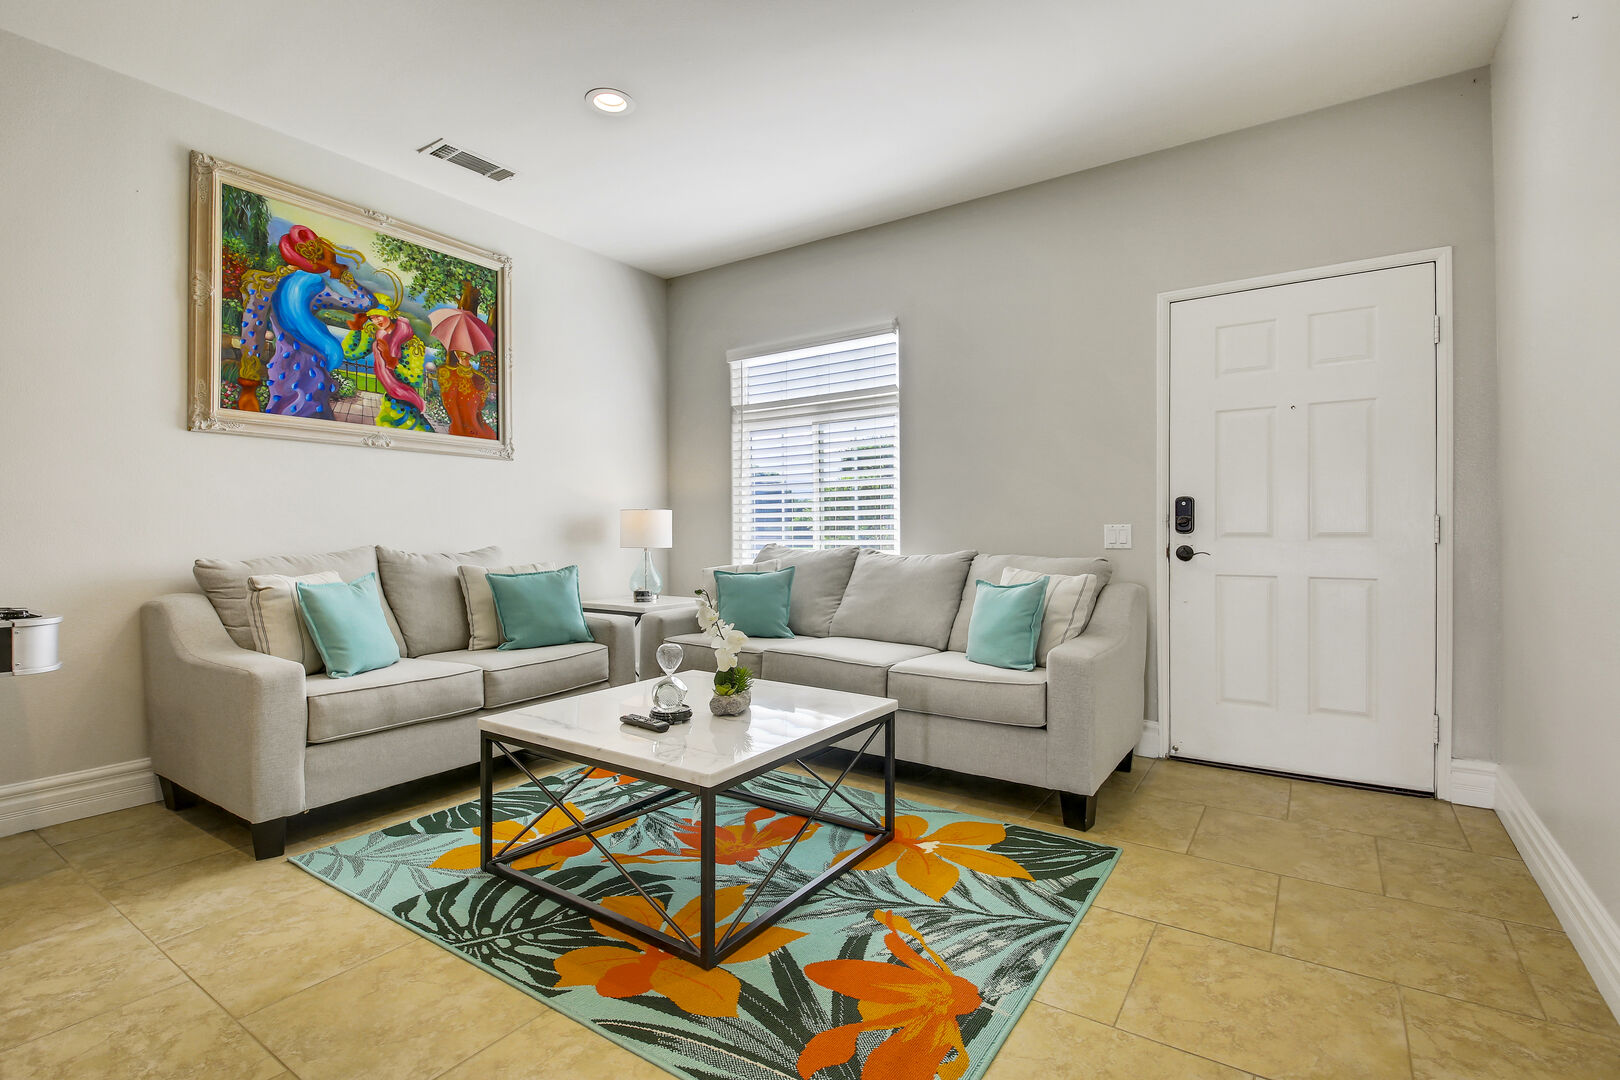 Enter this vacation home and step into a spacious living room seamlessly connected to a family kitchen.